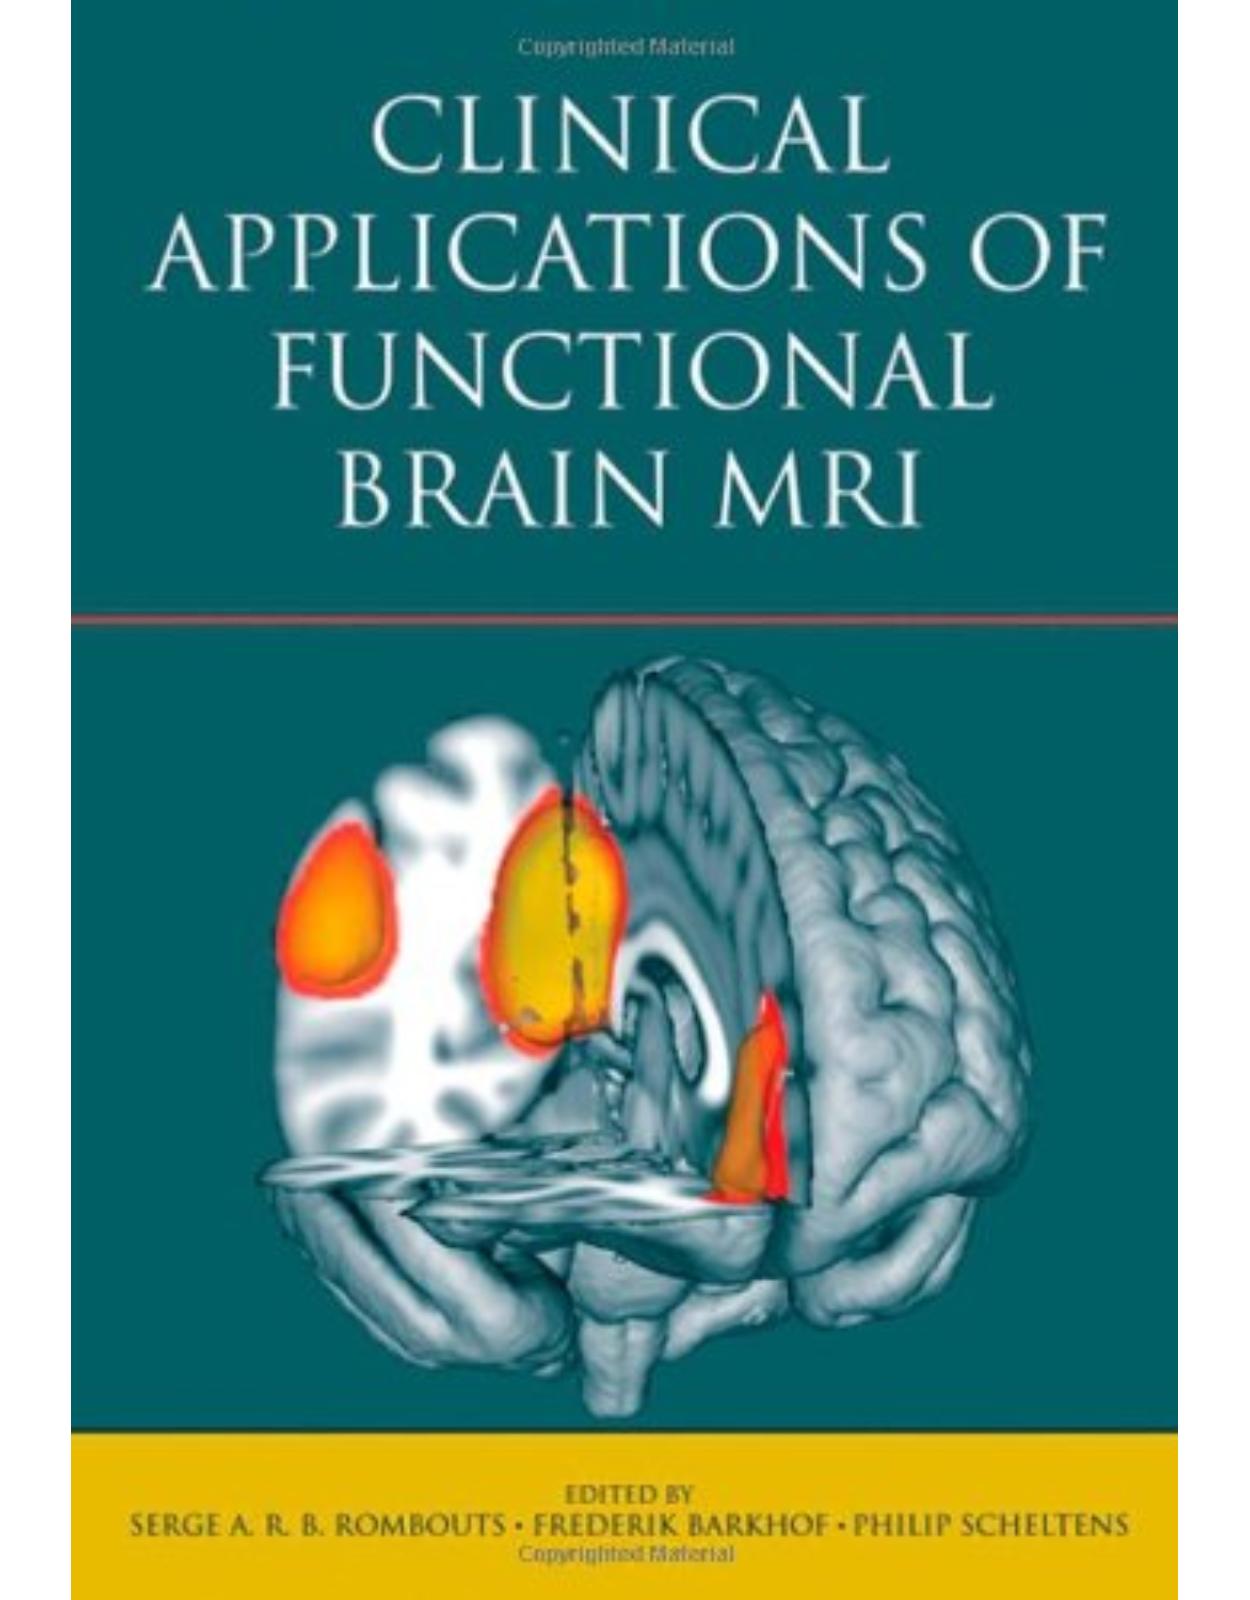 Clinical Applications of Functional Brain MRI